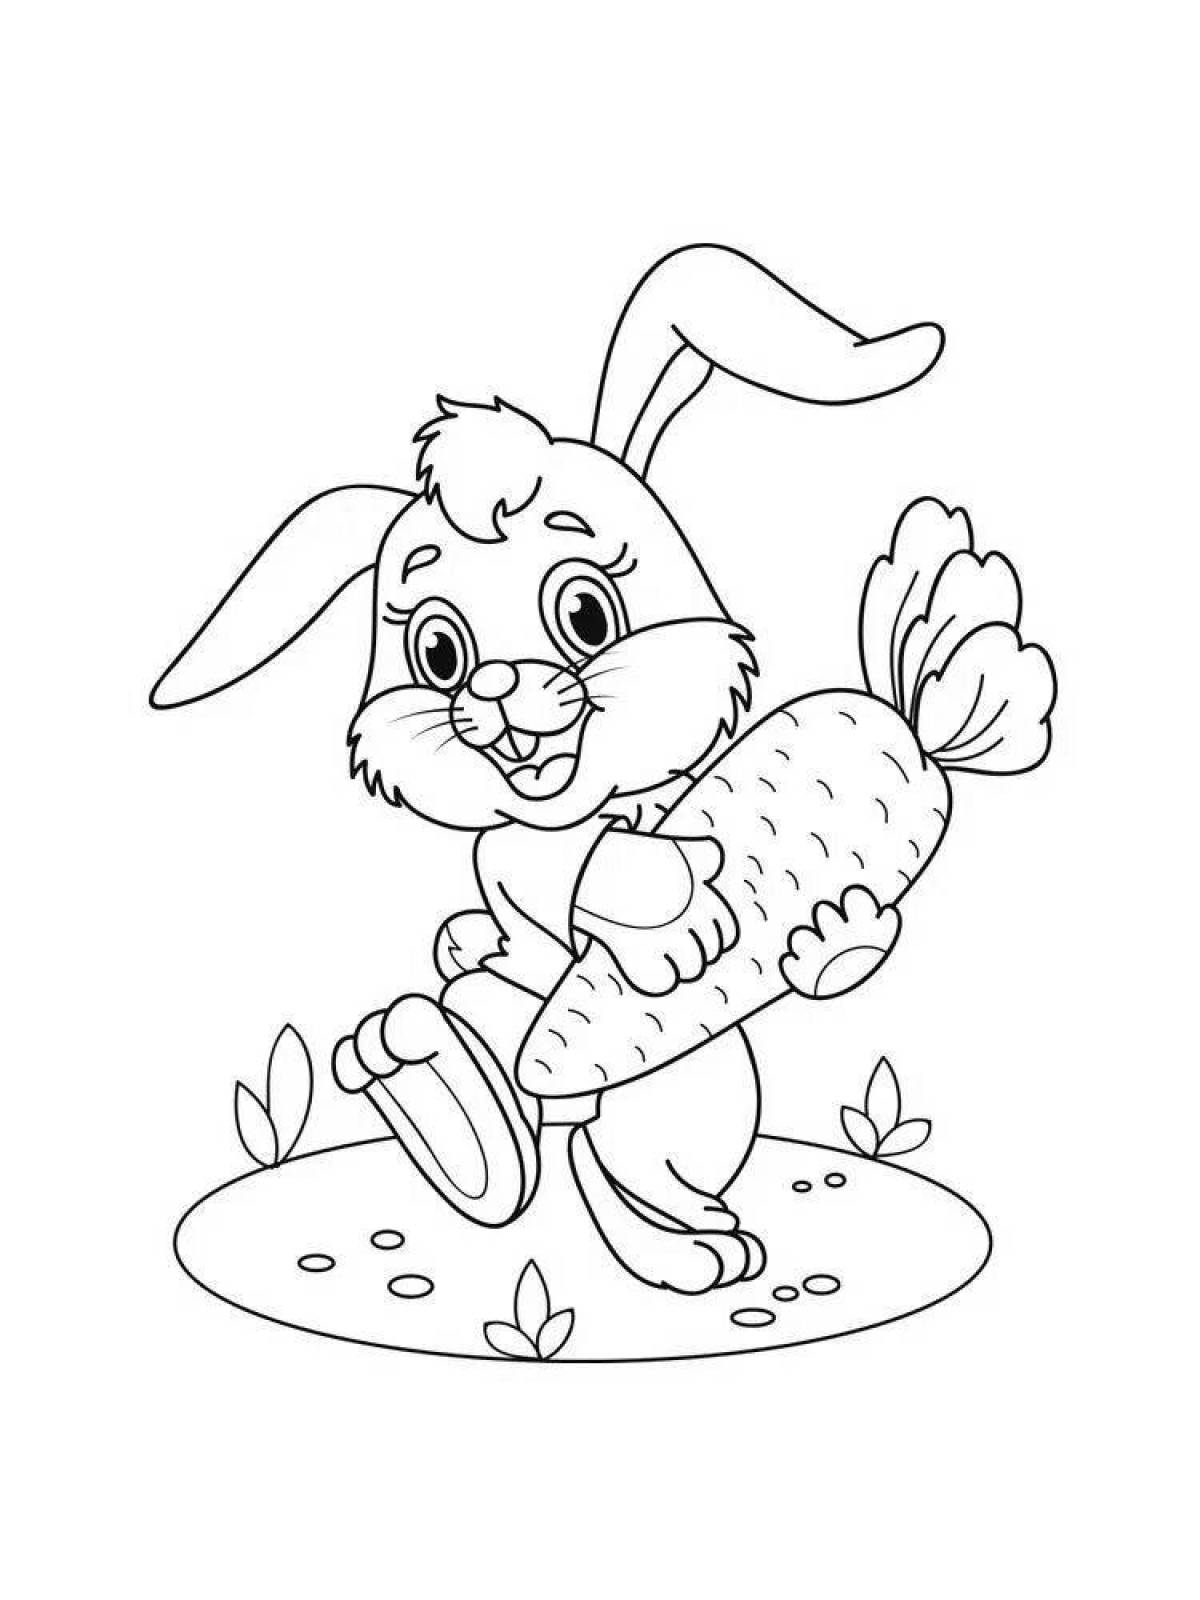 Amazing bunny coloring page